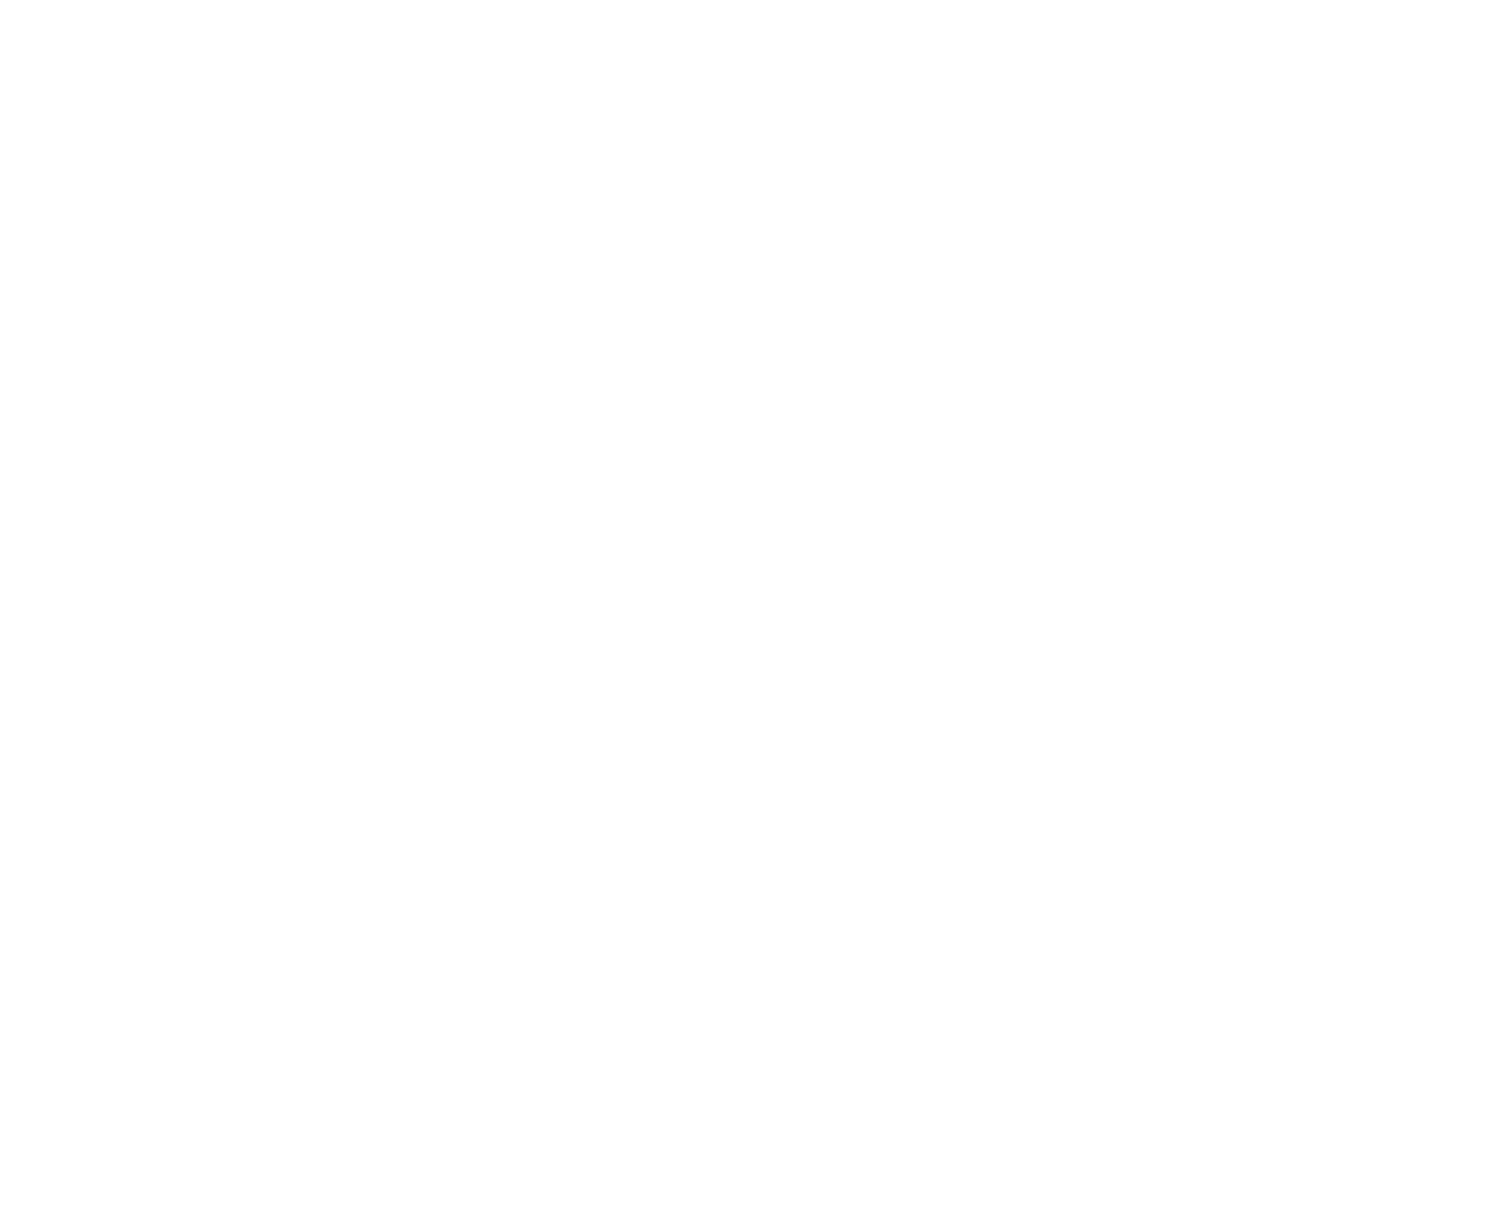 Vested Futures